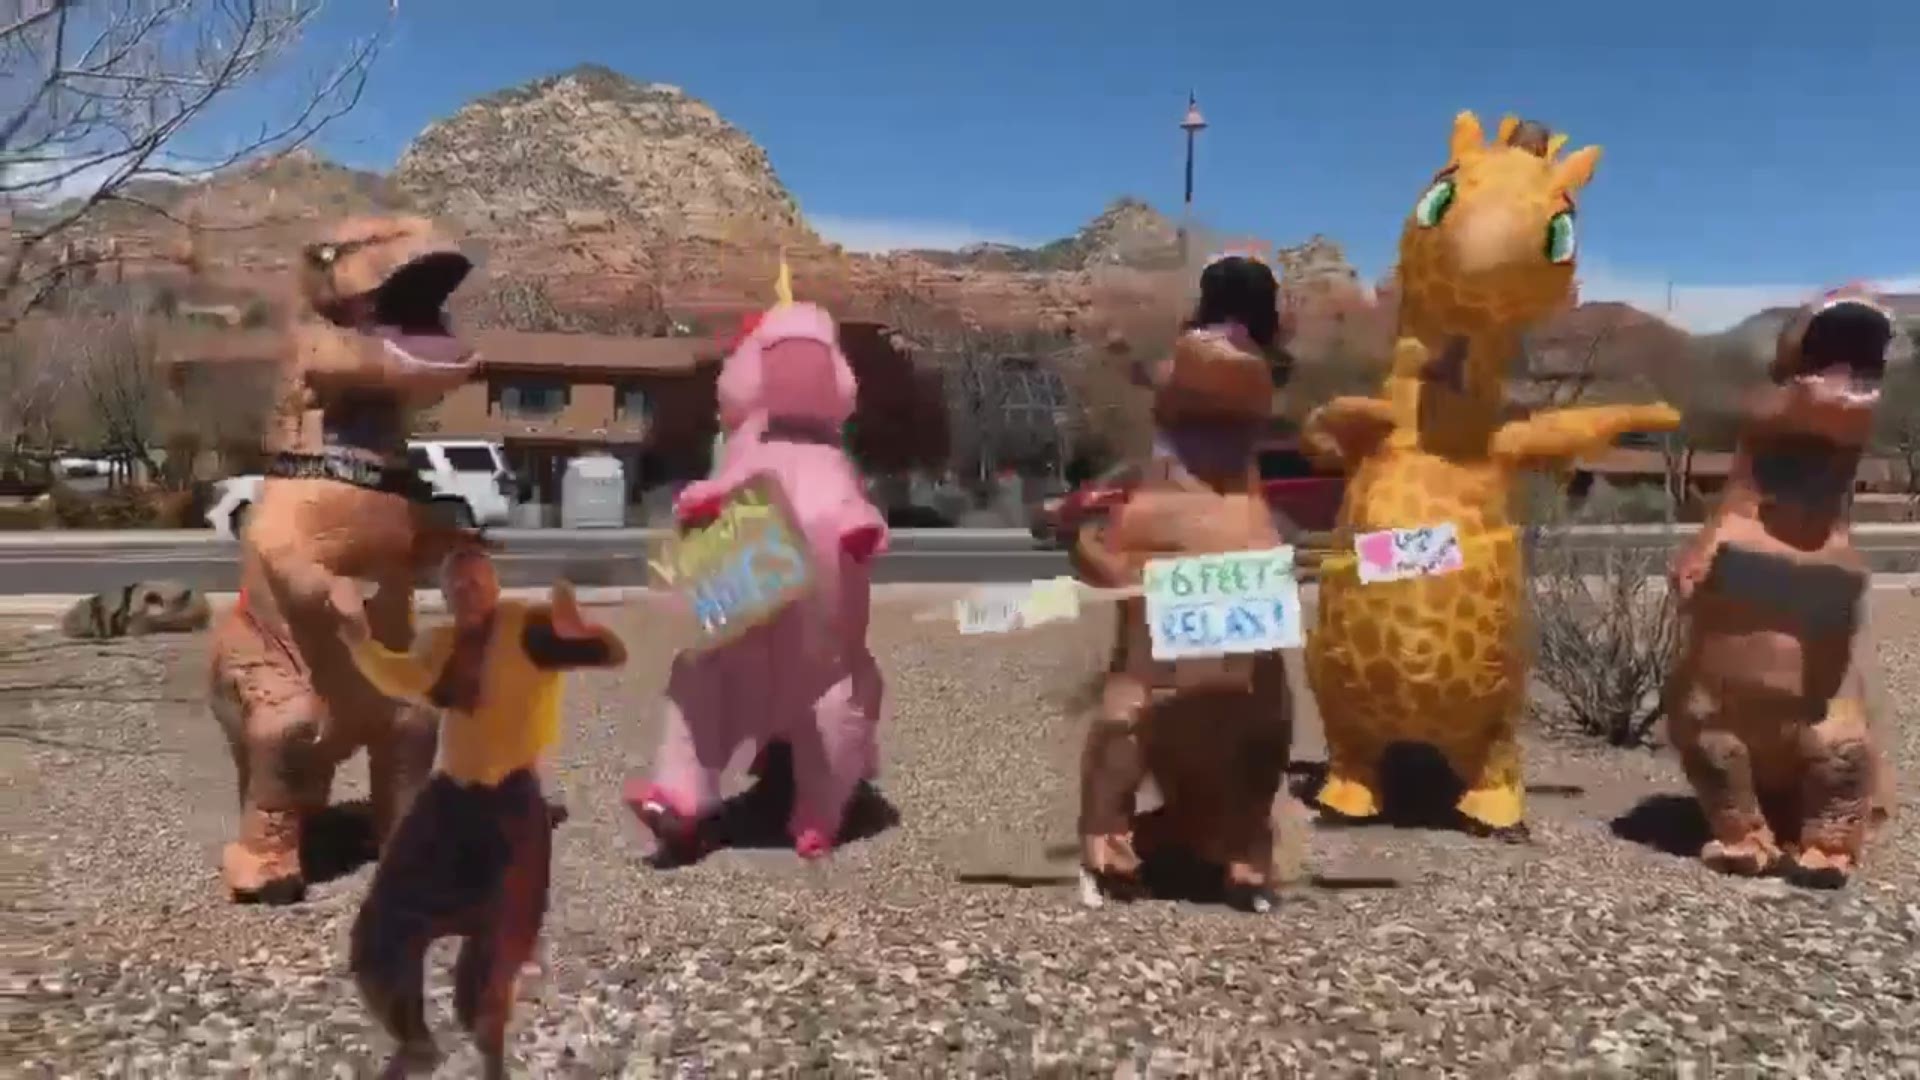 Sedona Staying Safe with a Social Distance Parade & Dance-off